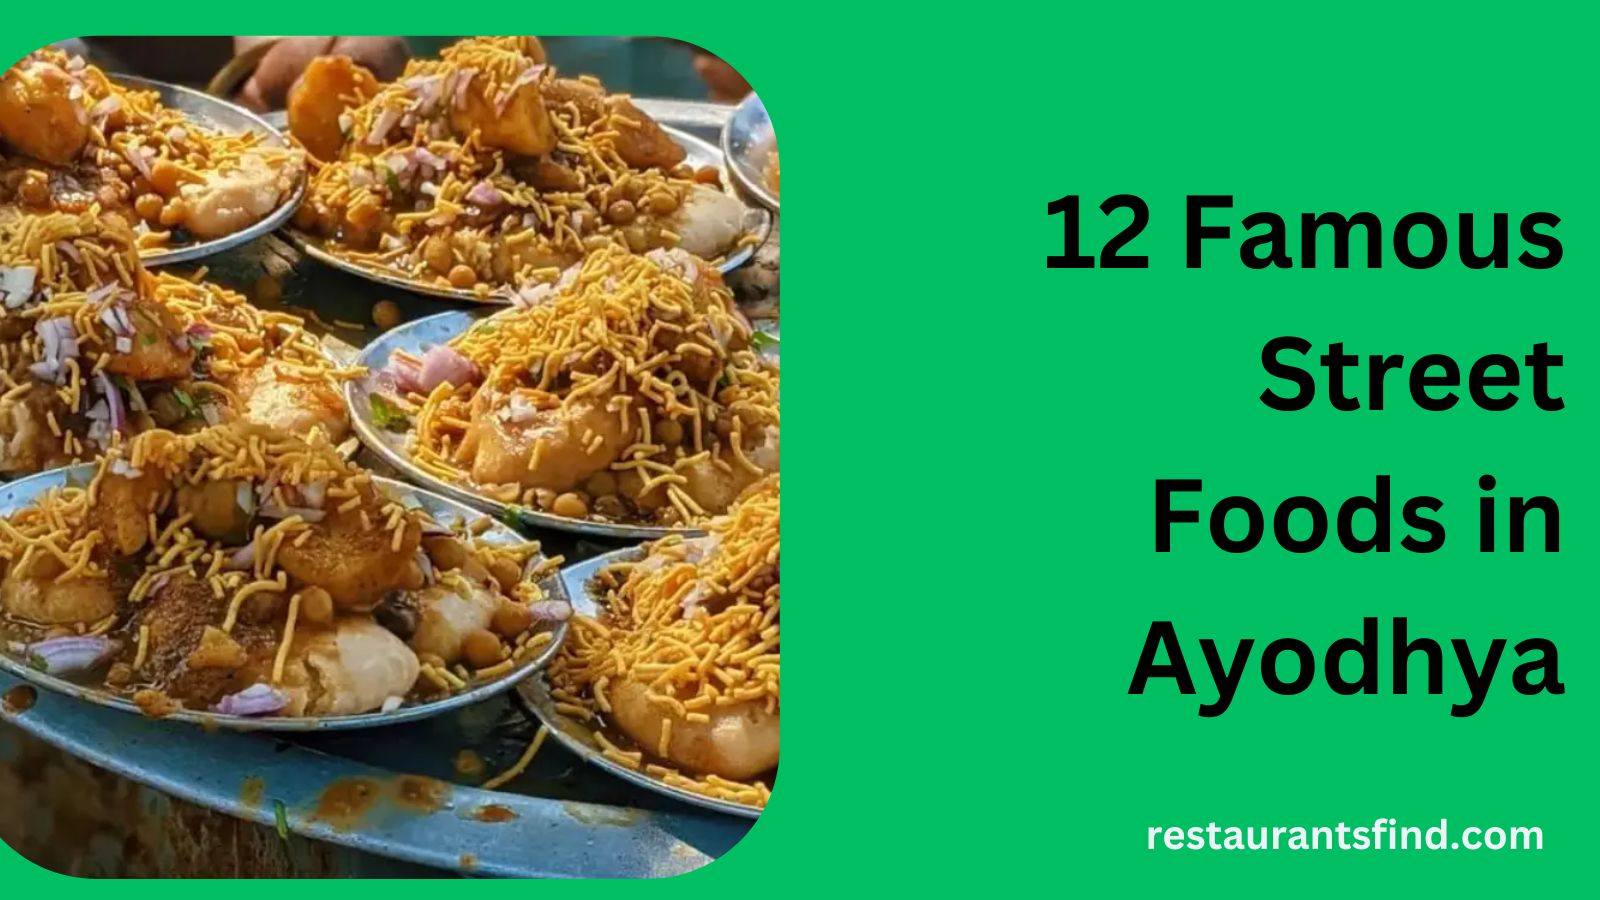 Famous Street Foods in Ayodhya